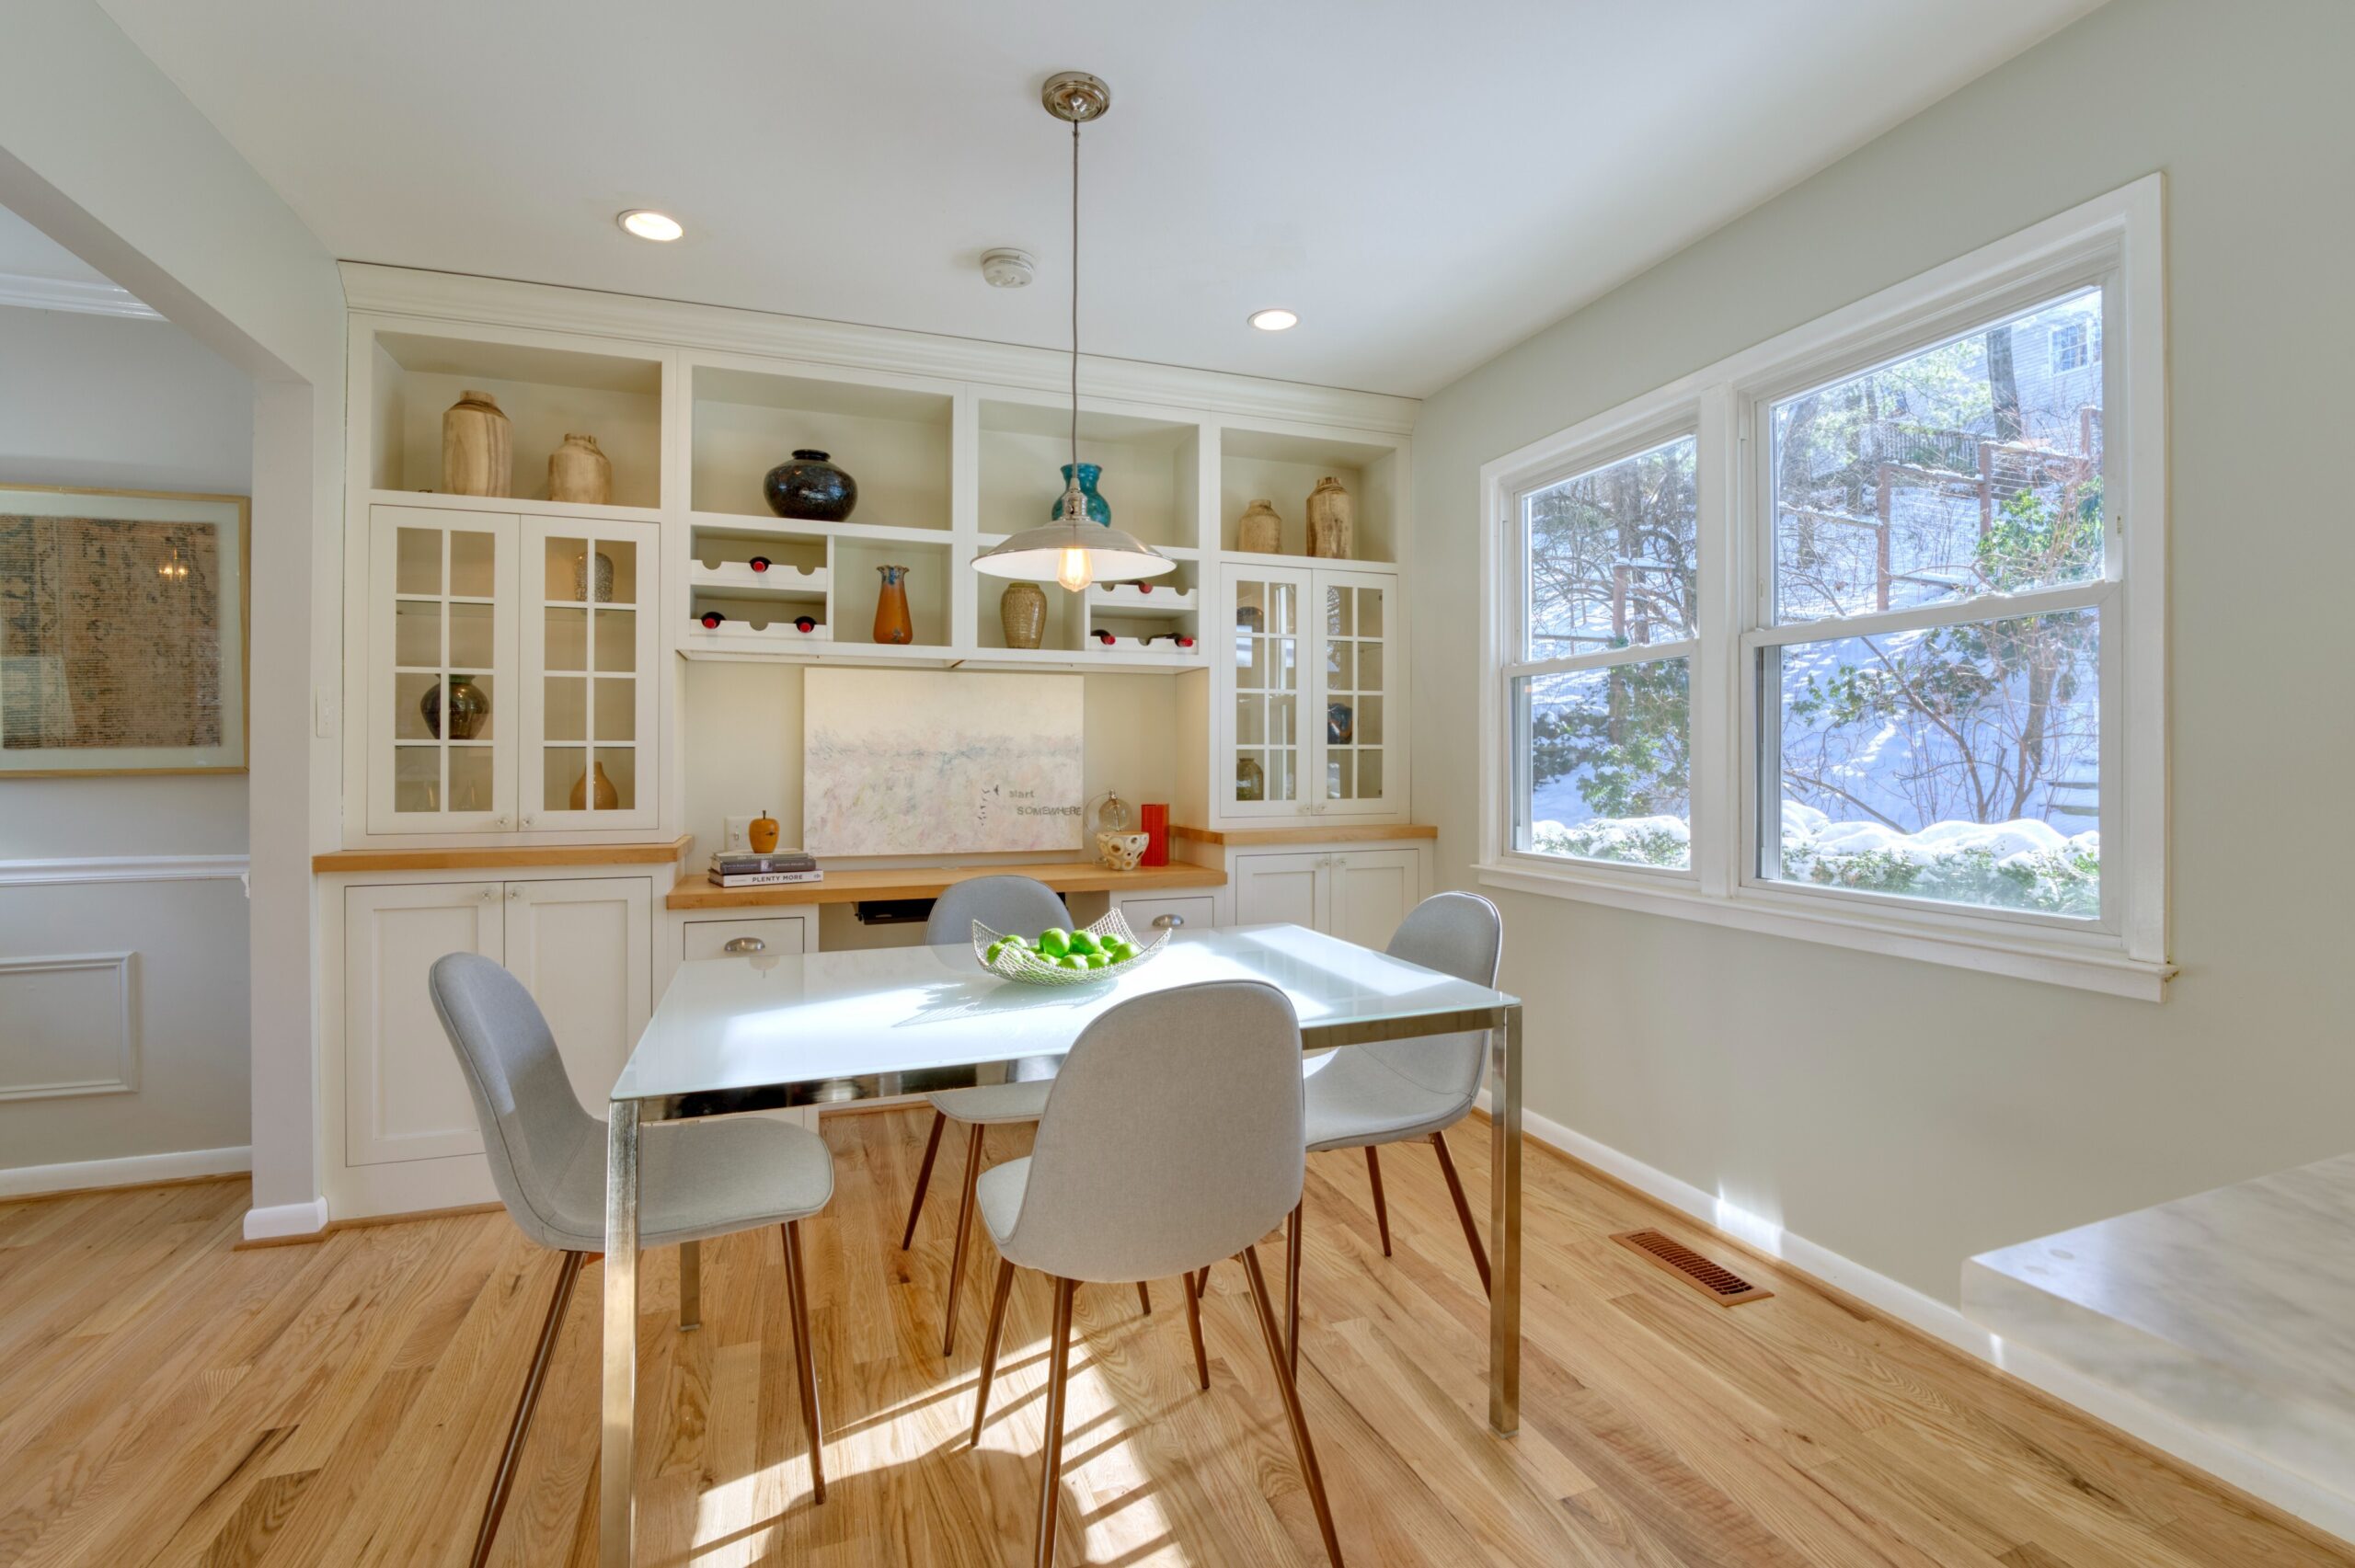 Professional interior photo of 9515 Center St in Vienna, Virginia - showing the kitchen eating area with table in front of built in shelves and a desk space